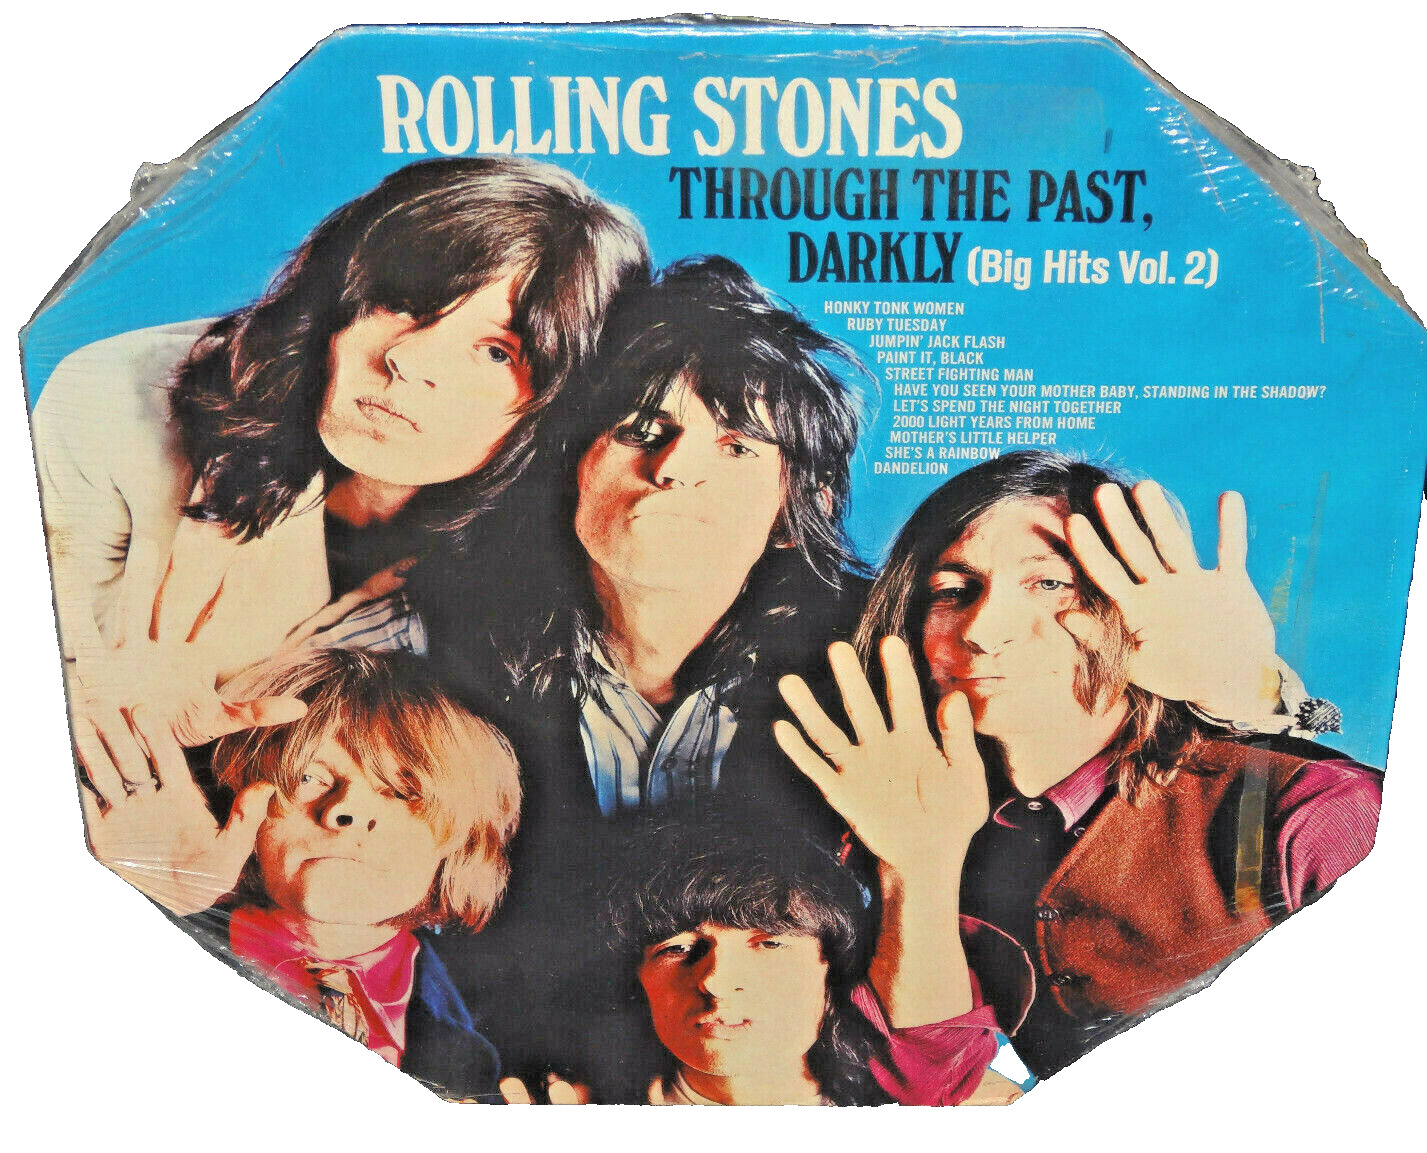 Rolling Stones Through The Past Sealed Vinyl Record LP USA 1969-81 London NPS-3 